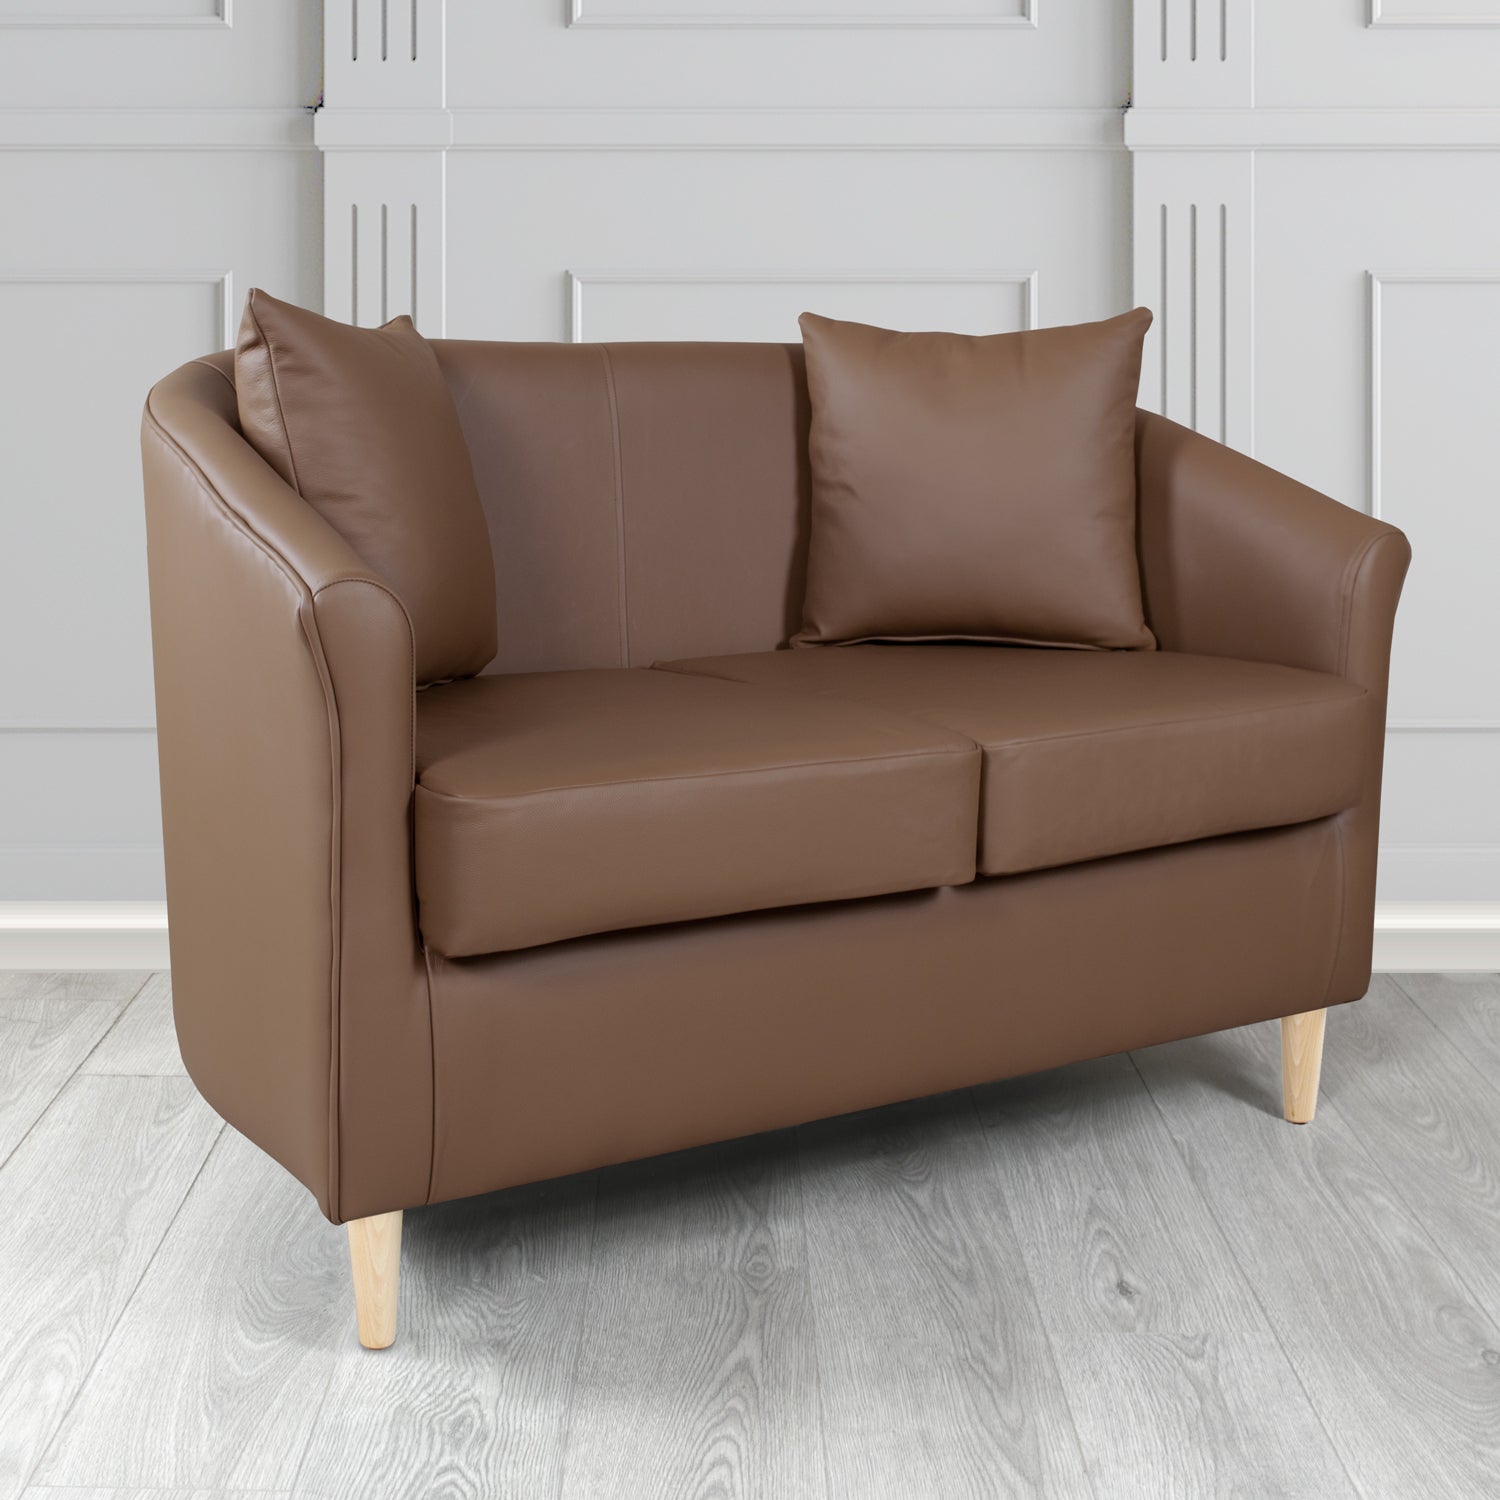 St Tropez Shelly Mocha Crib 5 Genuine Leather 2 Seater Tub Sofa with Scatter Cushions - The Tub Chair Shop